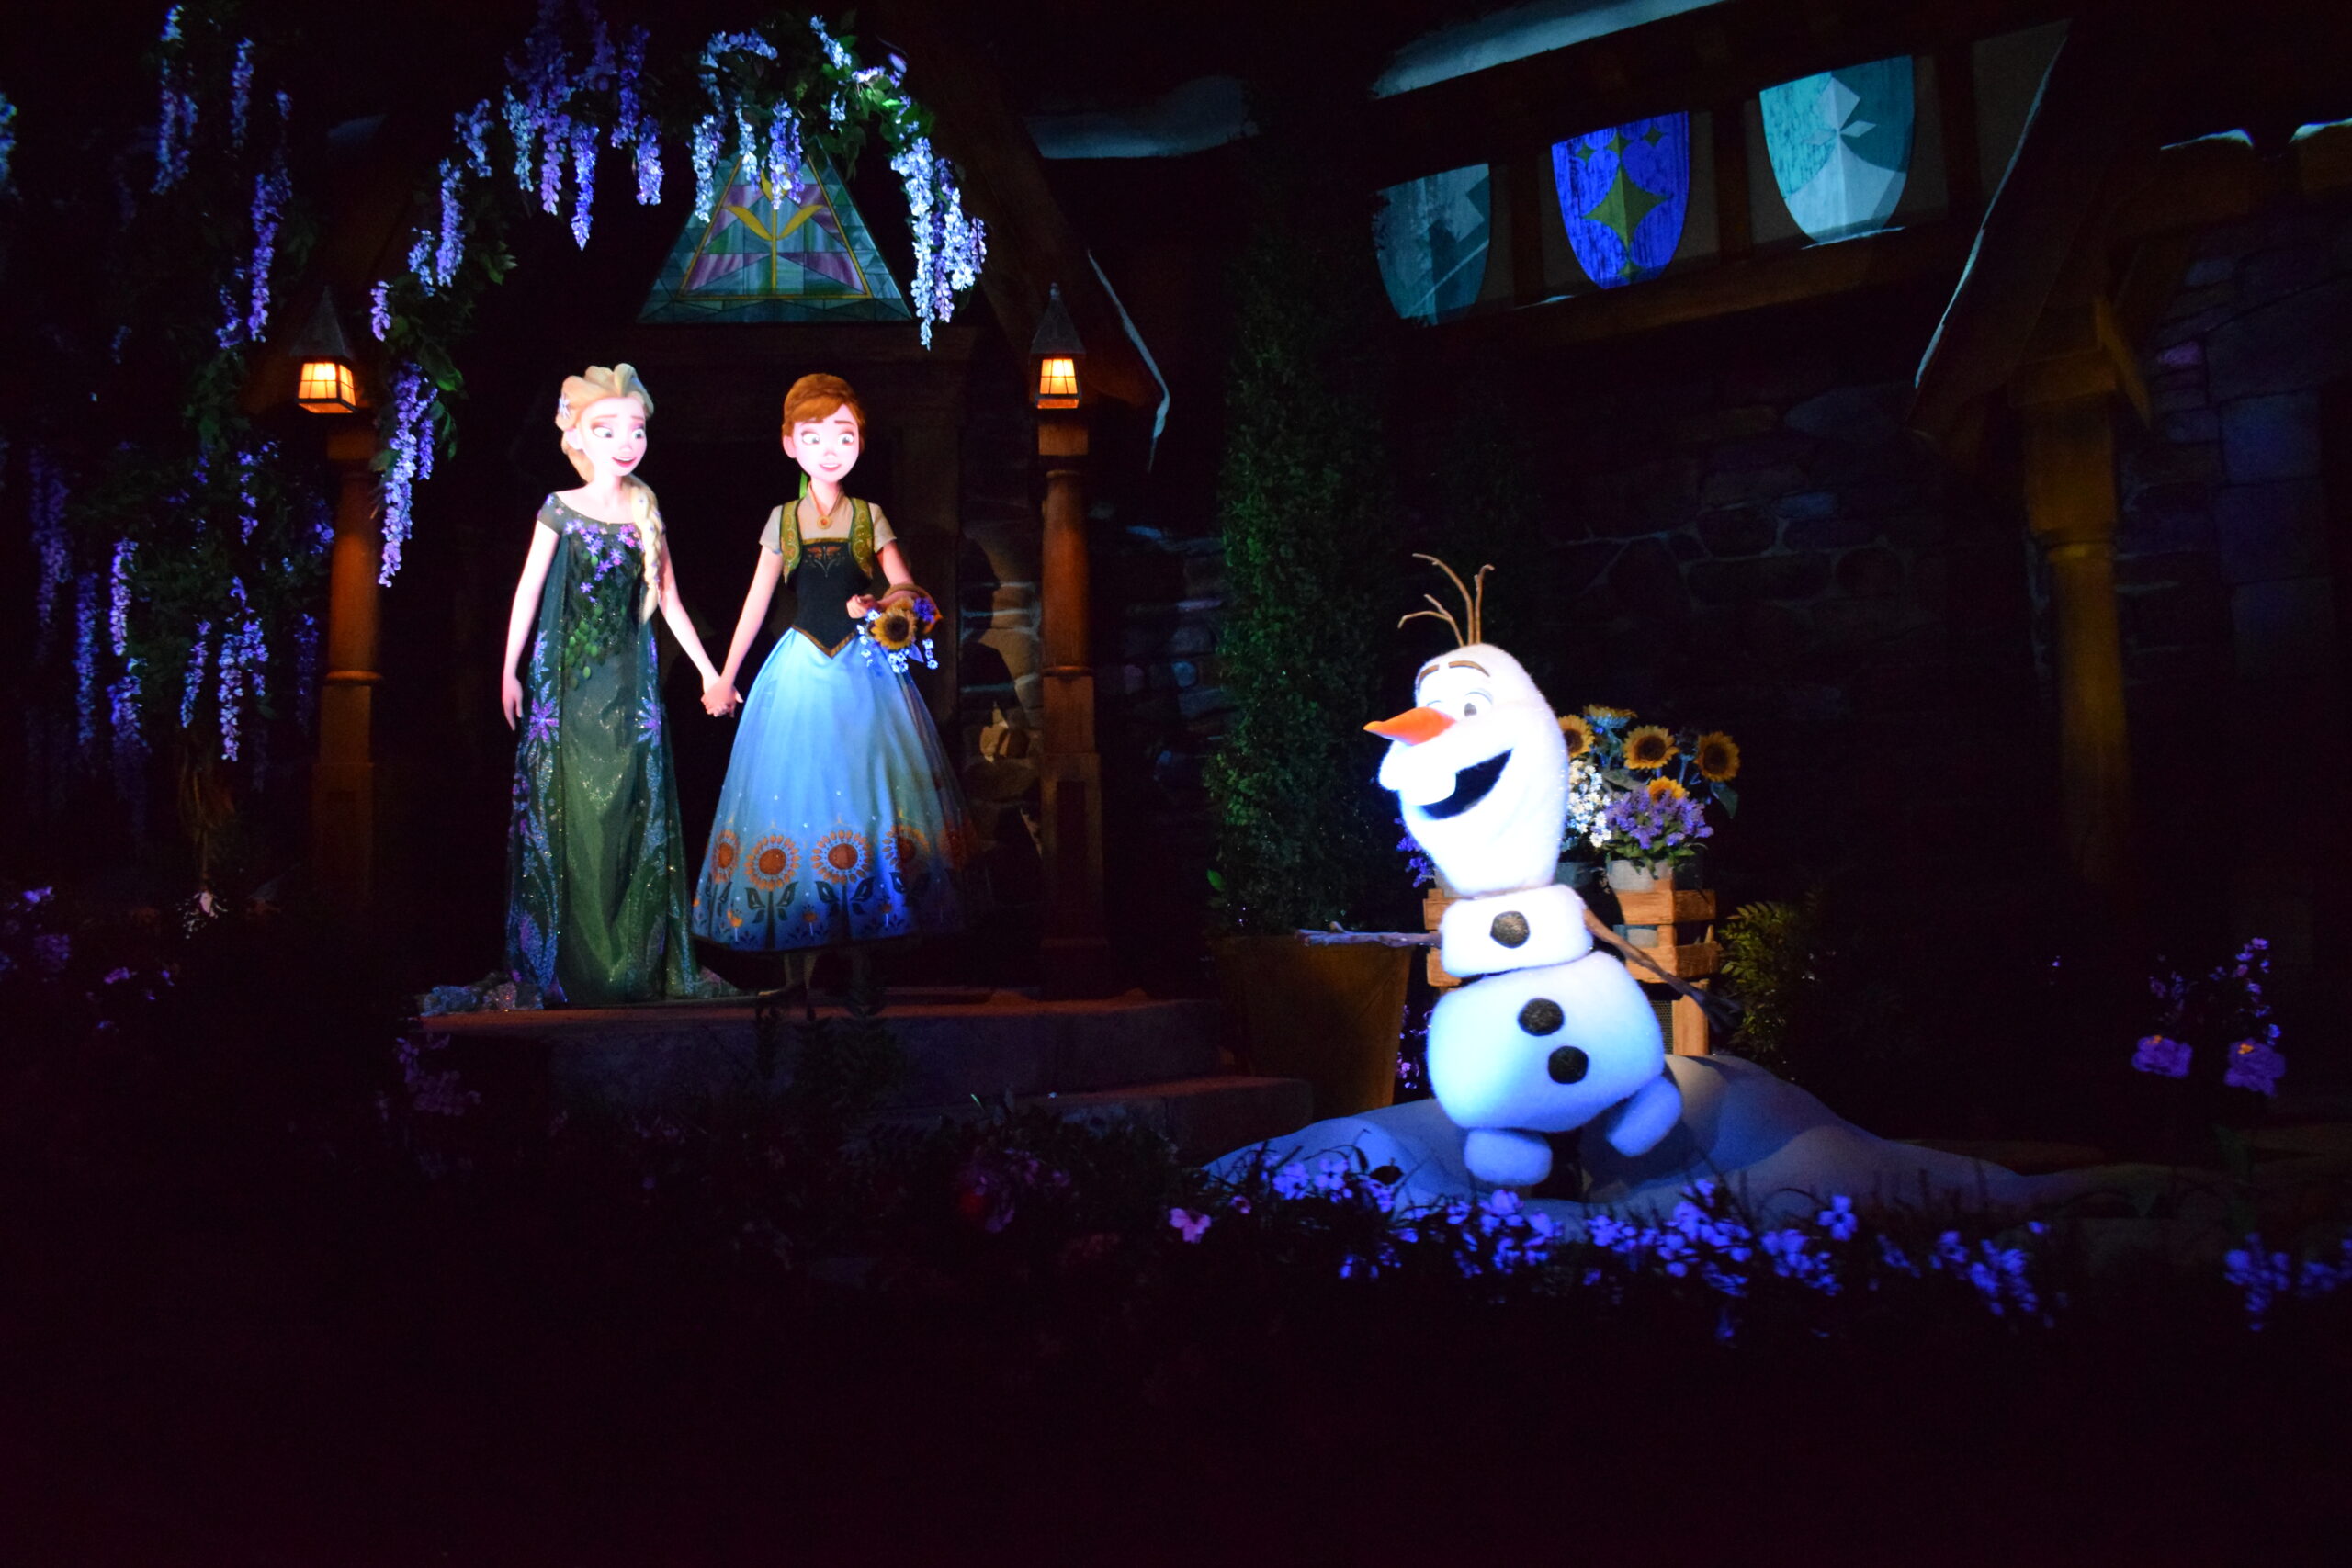 Frozen ride at epcot in Disney wold FLorida